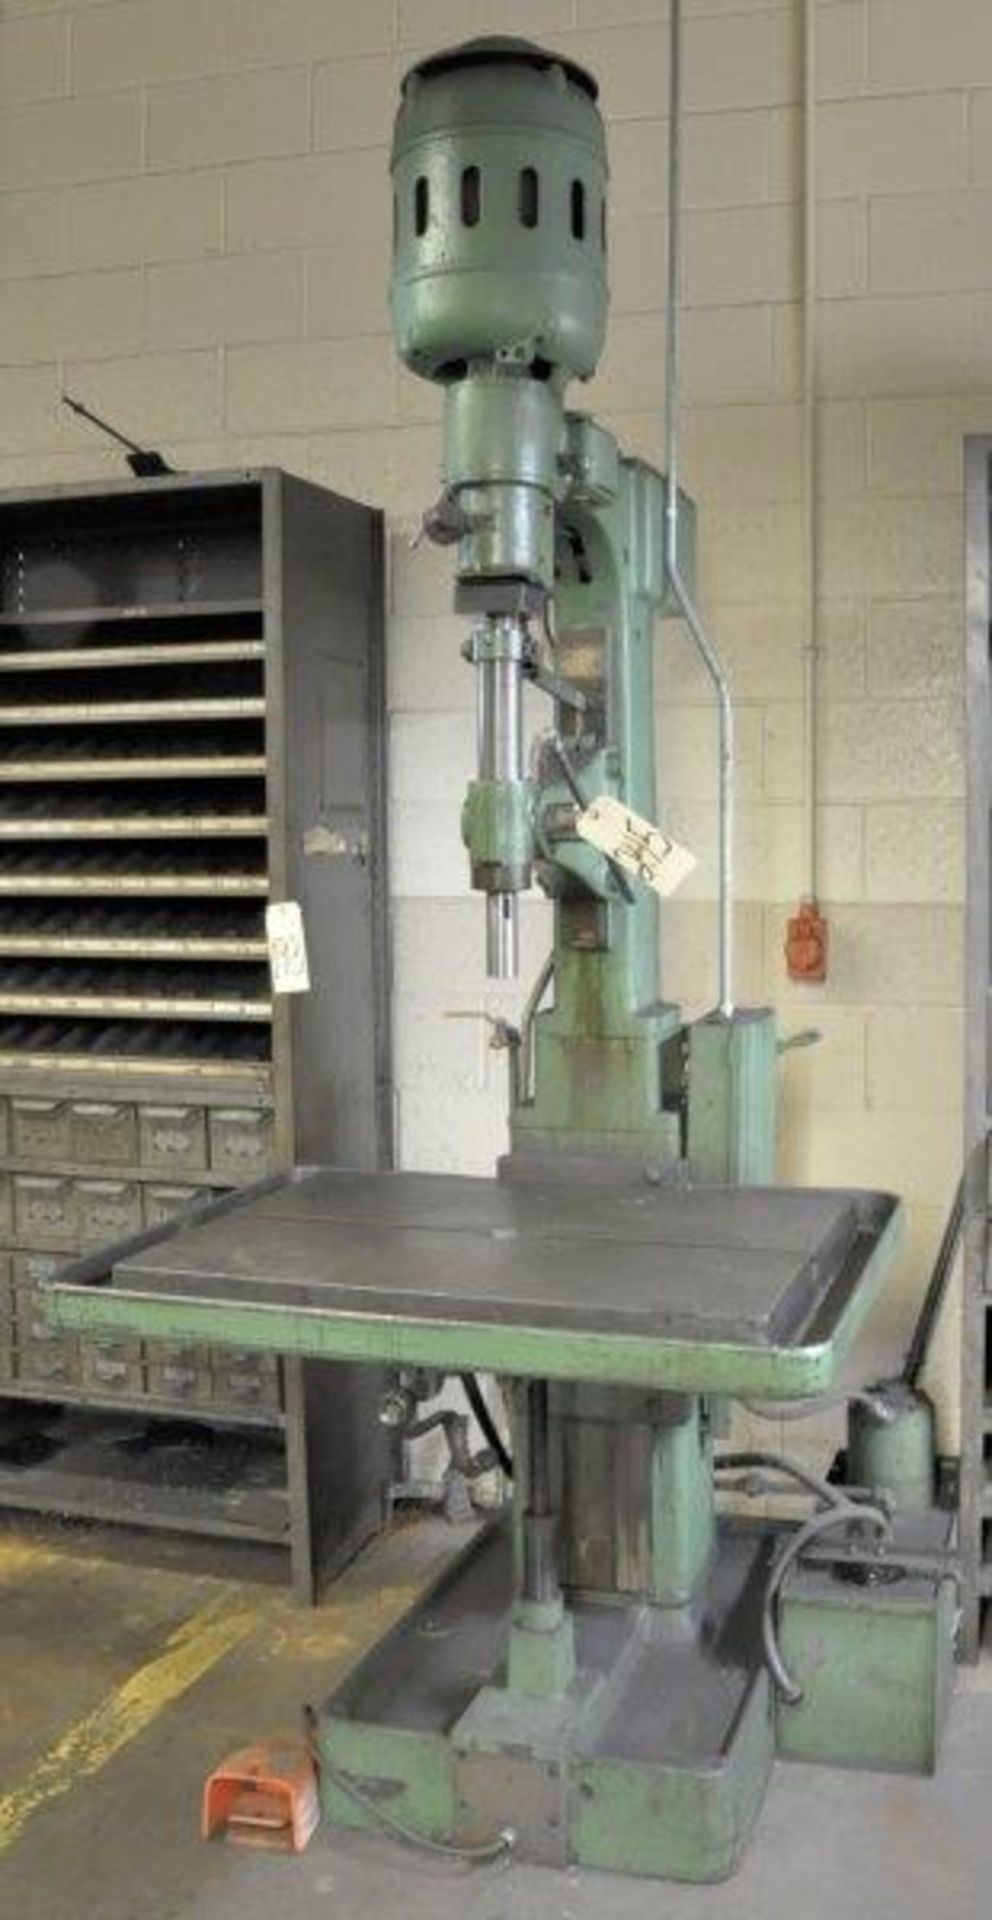 Chas Allen 33" Table Type Production Drill Press, S/n N/a, 25" x 34" Work Surface, Foot Pedal